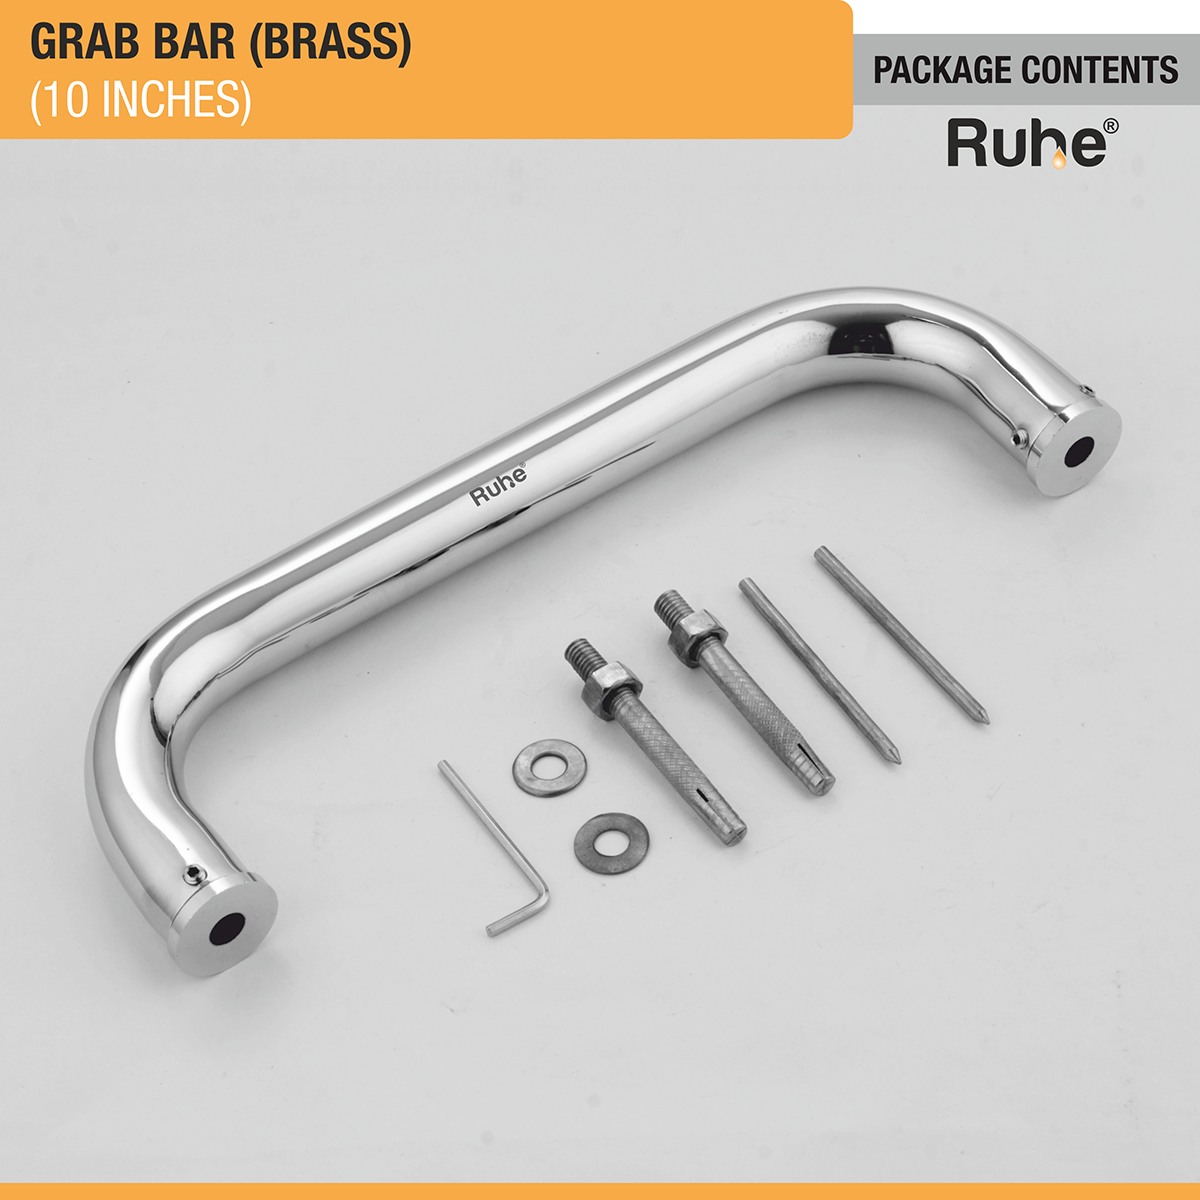 Brass Grab Bar (10 inches) package content